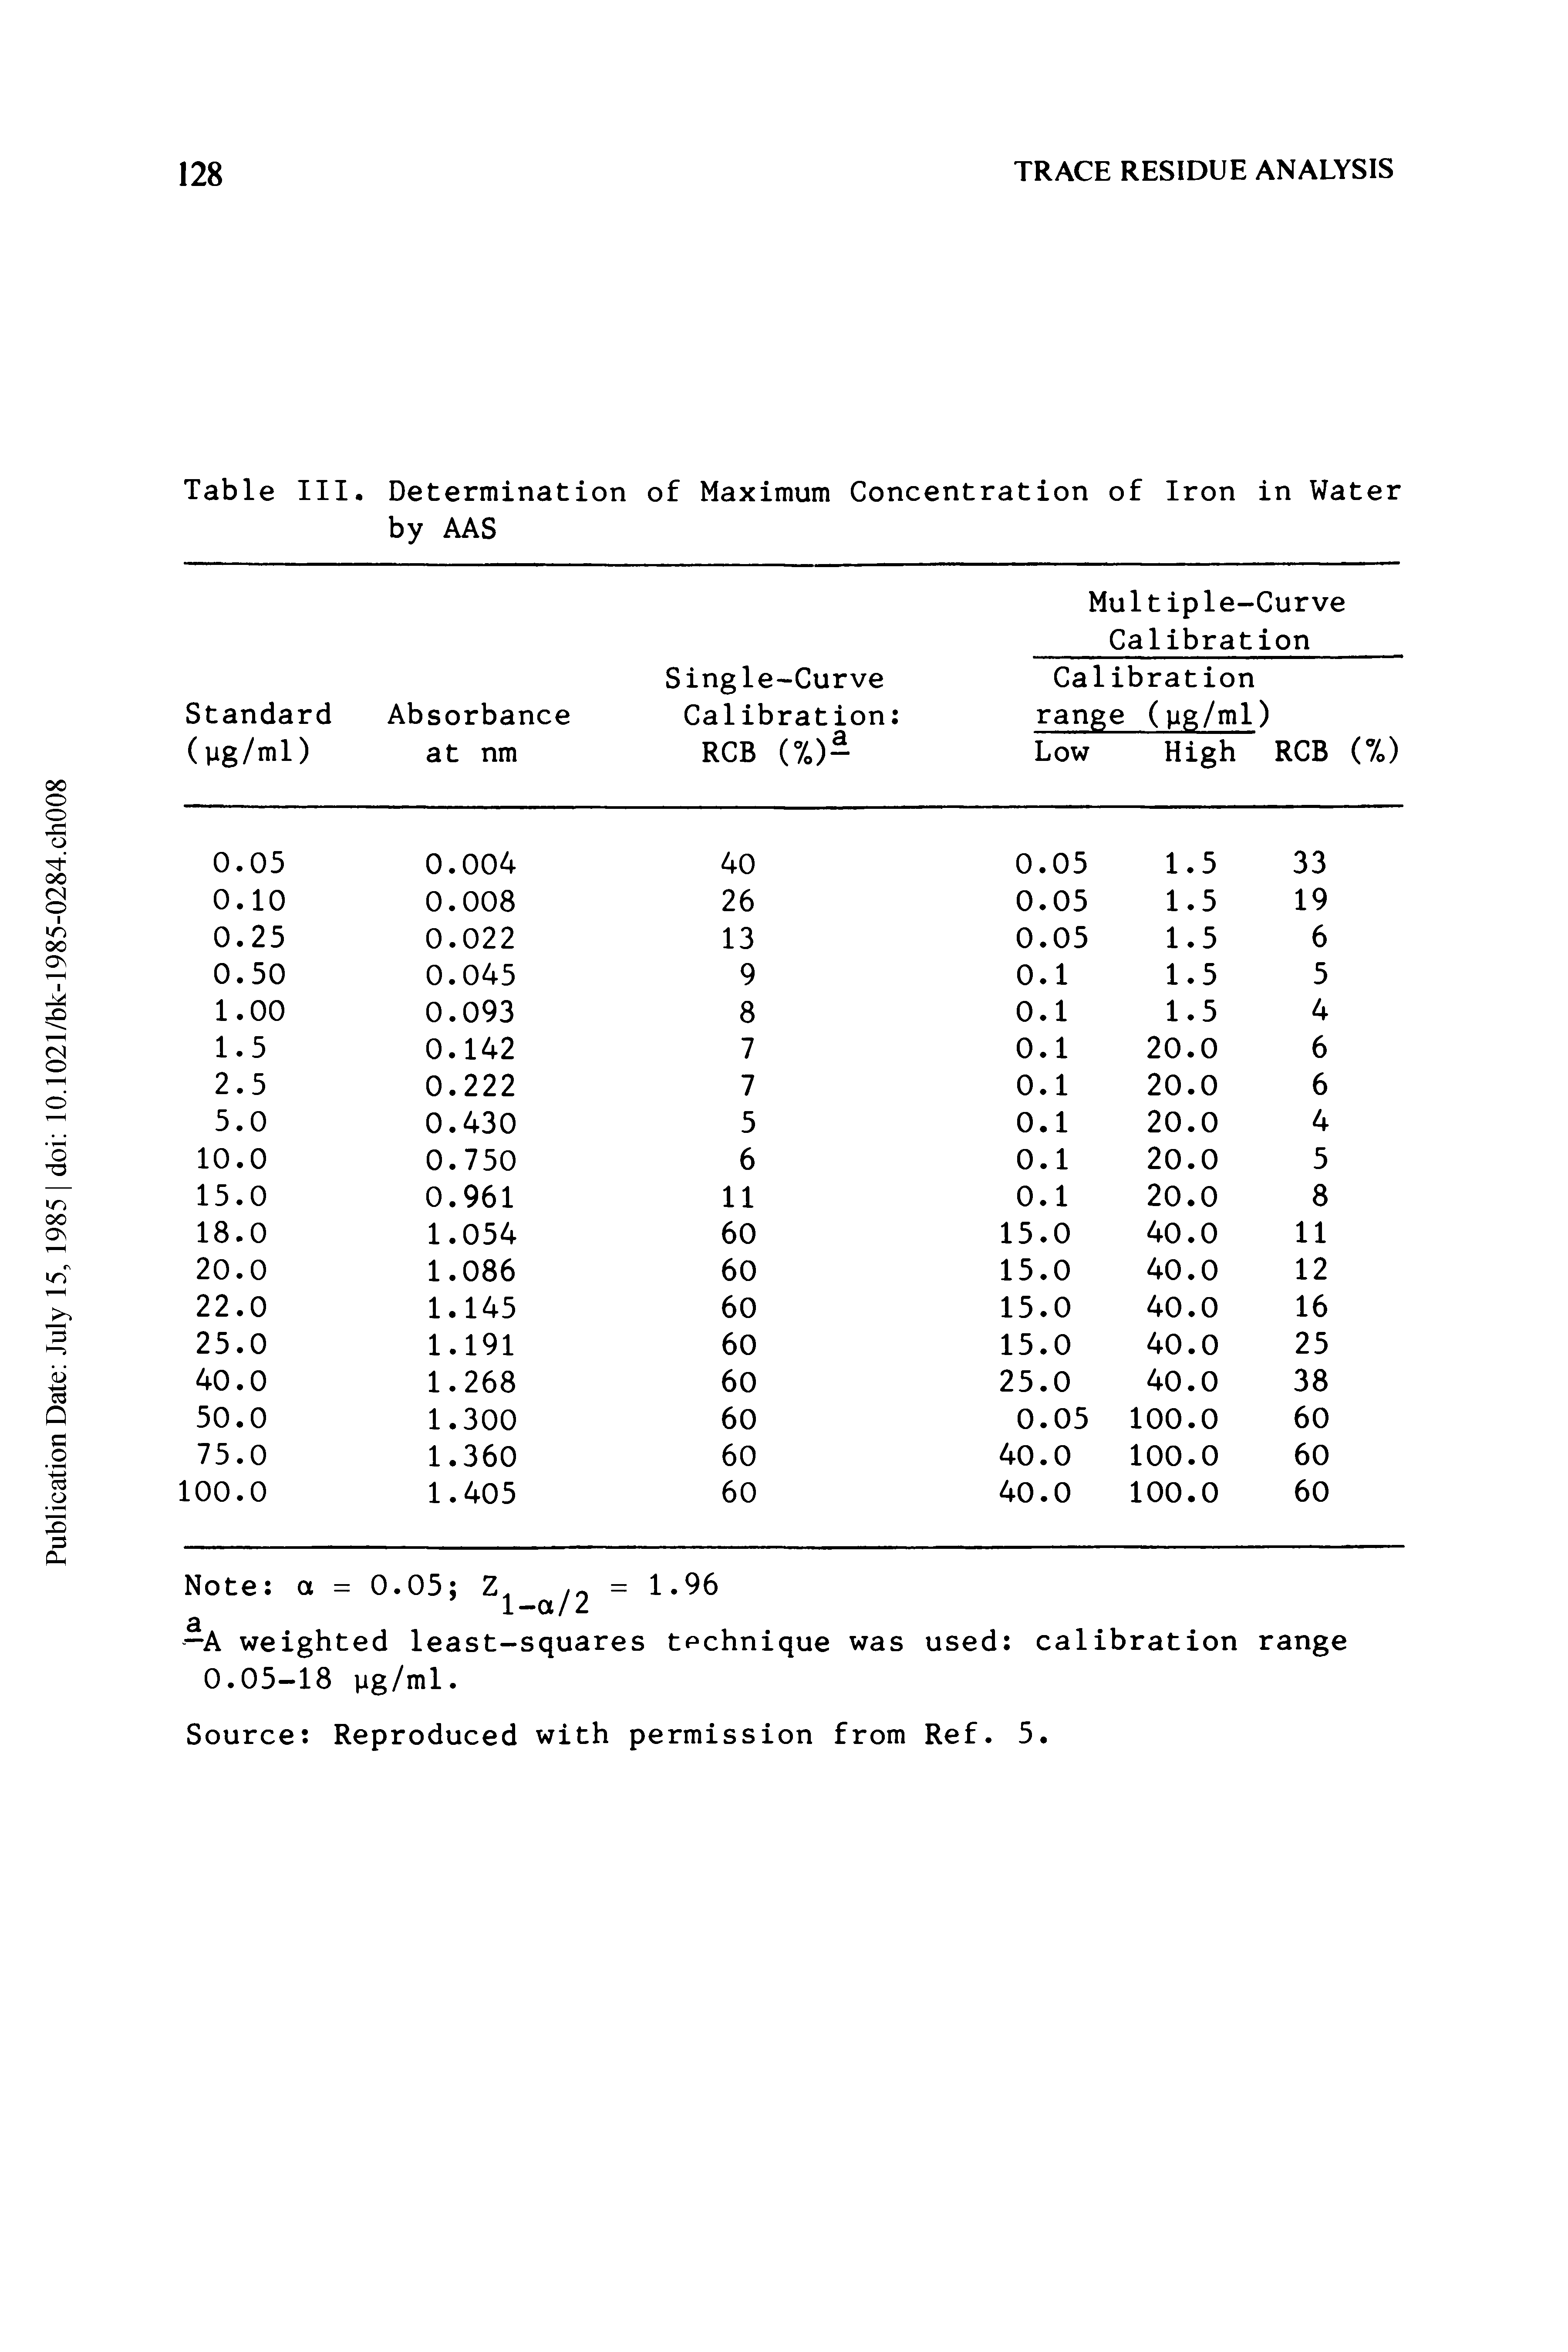 Table III. Determination of Maximum Concentration of Iron in Water by AAS...